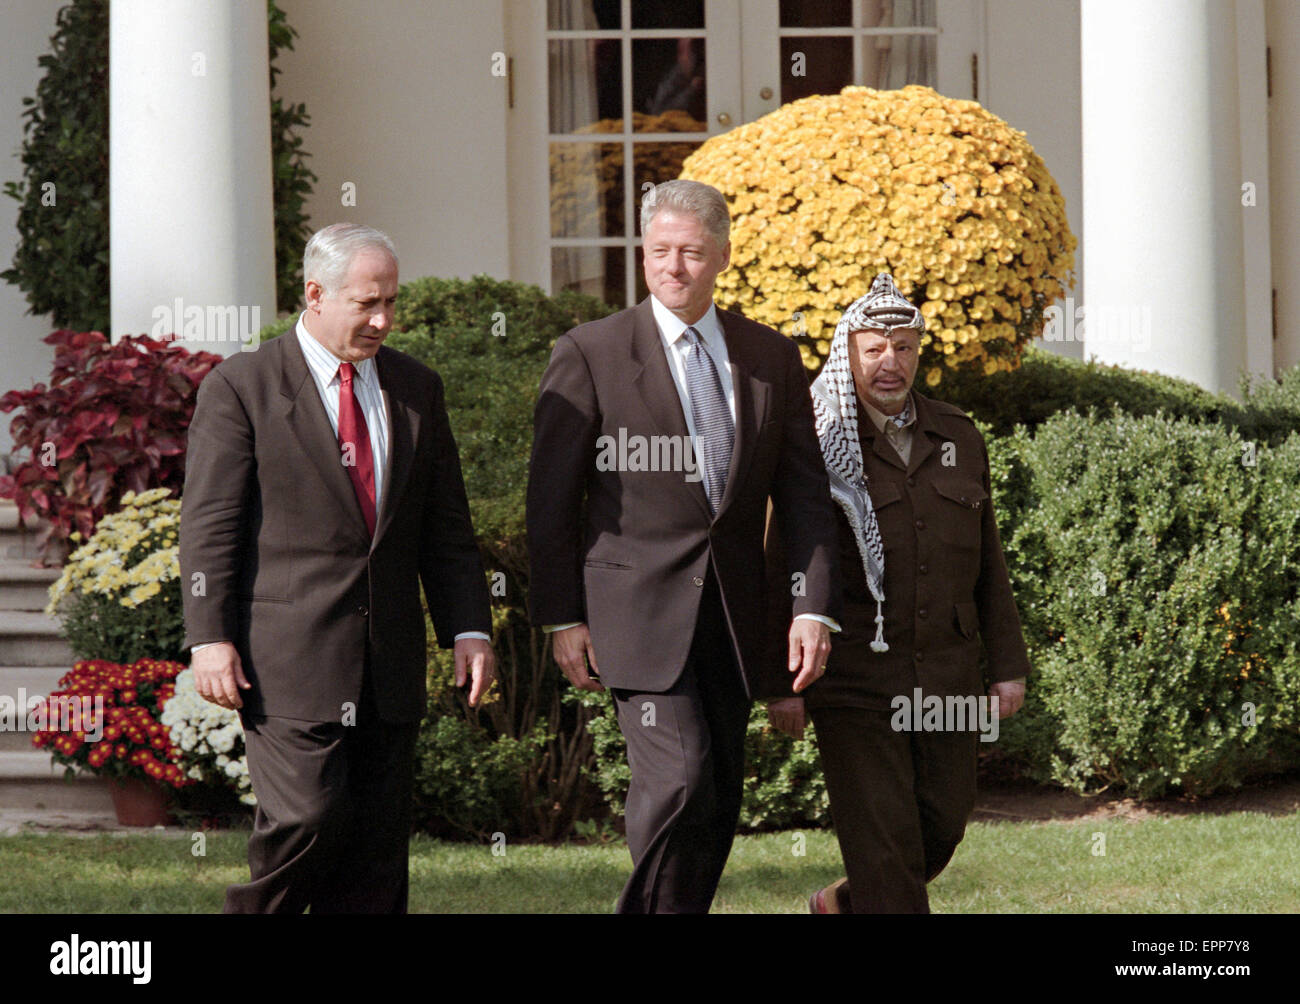 US President Bill Clinton with Israeli Prime Minister Benjamin Netanyahu and Palestinian leader Yasser Arafat prior to the Wye River Summit at the White House October 15, 1998 in Washington, DC. Netanyahu and Arafat are meeting in the US to try and revive the Middle East peace accord. Stock Photo